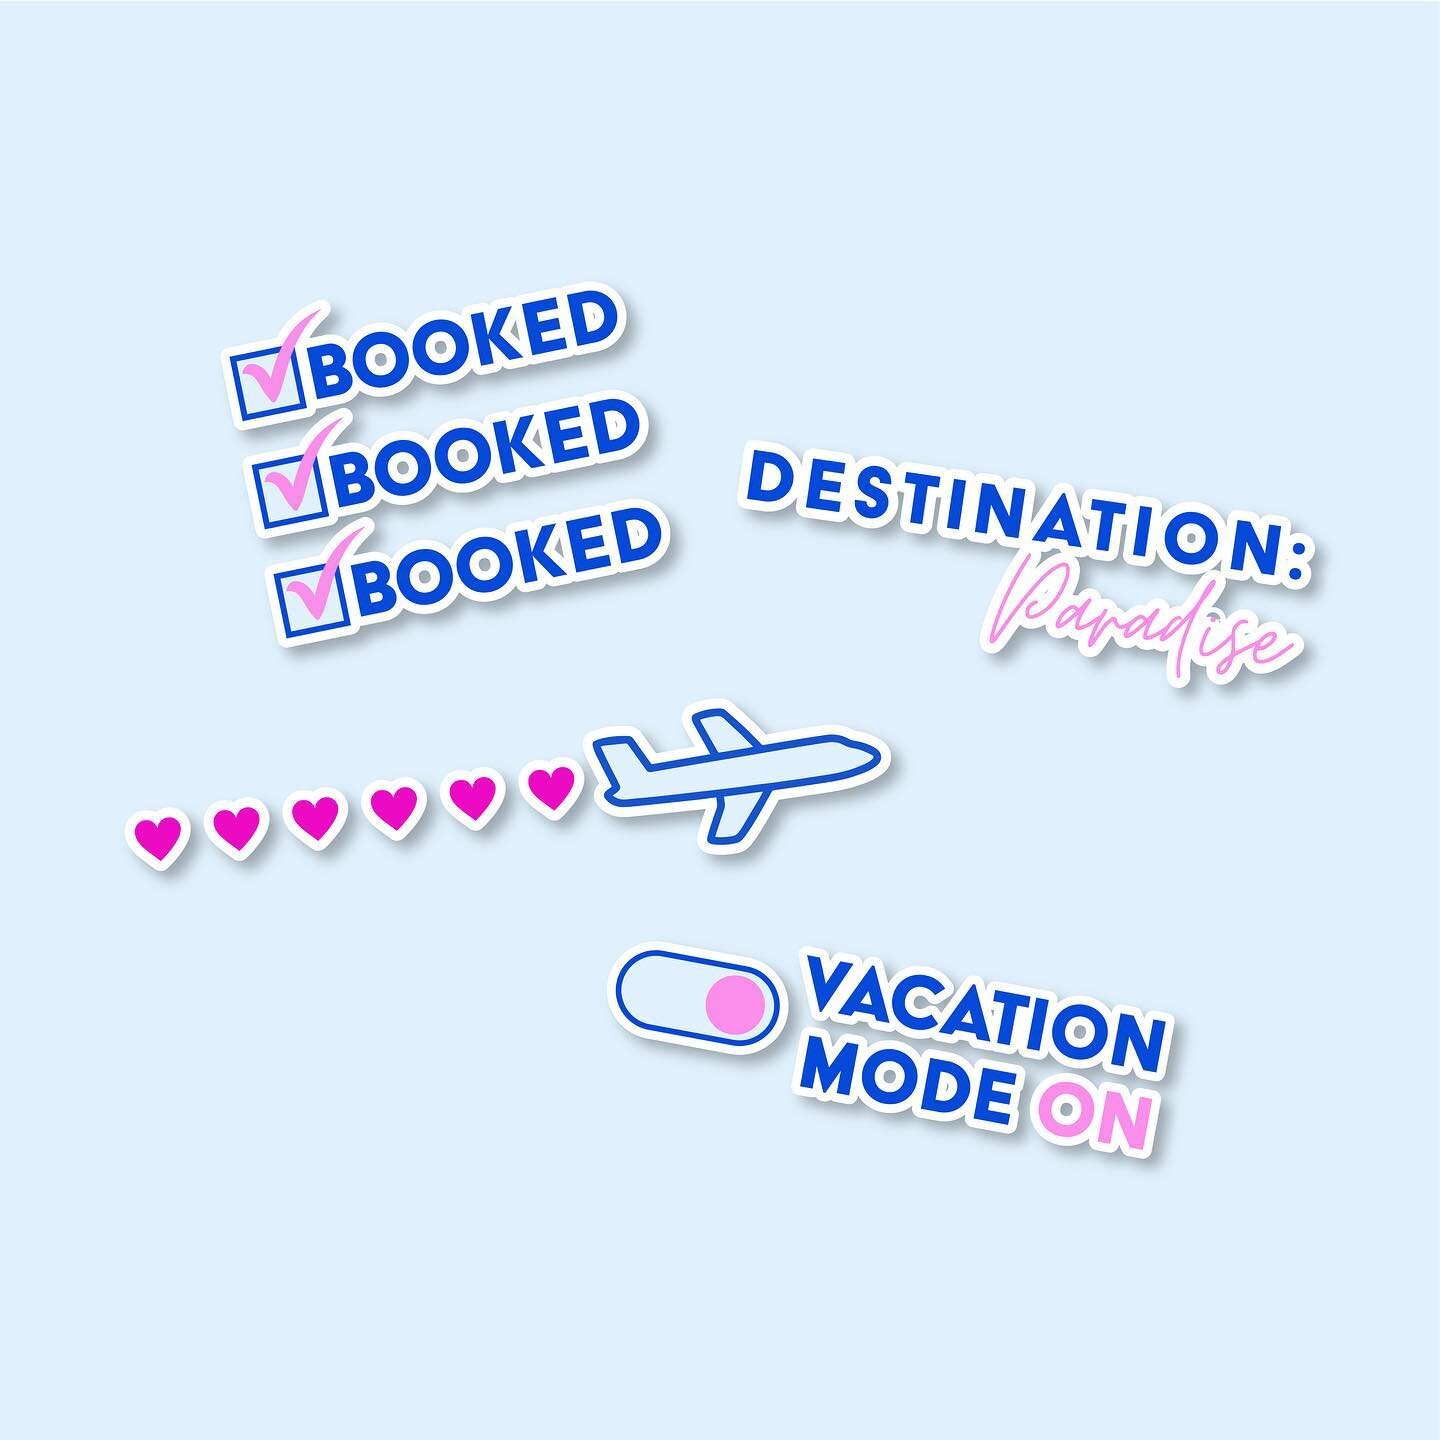 Made some fun little GIFs/stickers for @nicolaandcompany ✈️